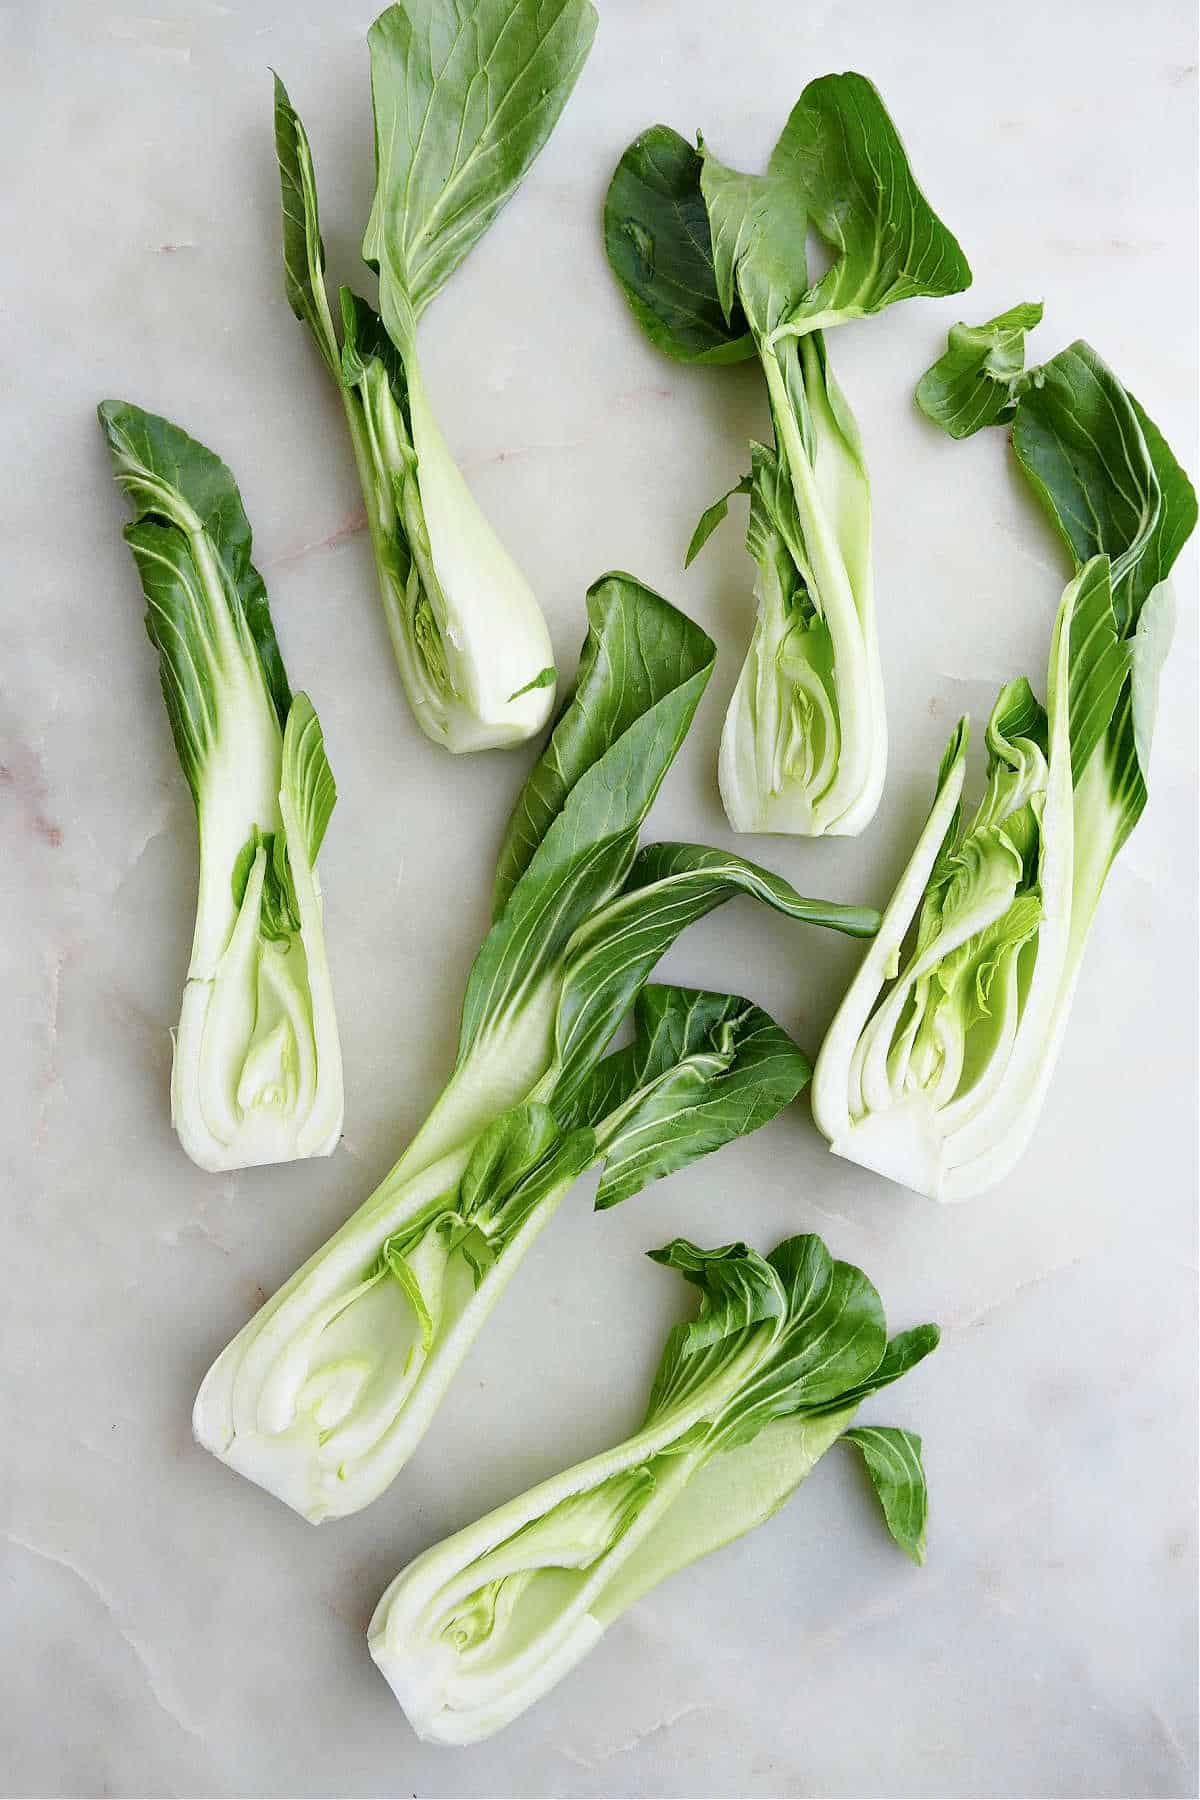 baby bok choy halves spread out next to each other on a counter